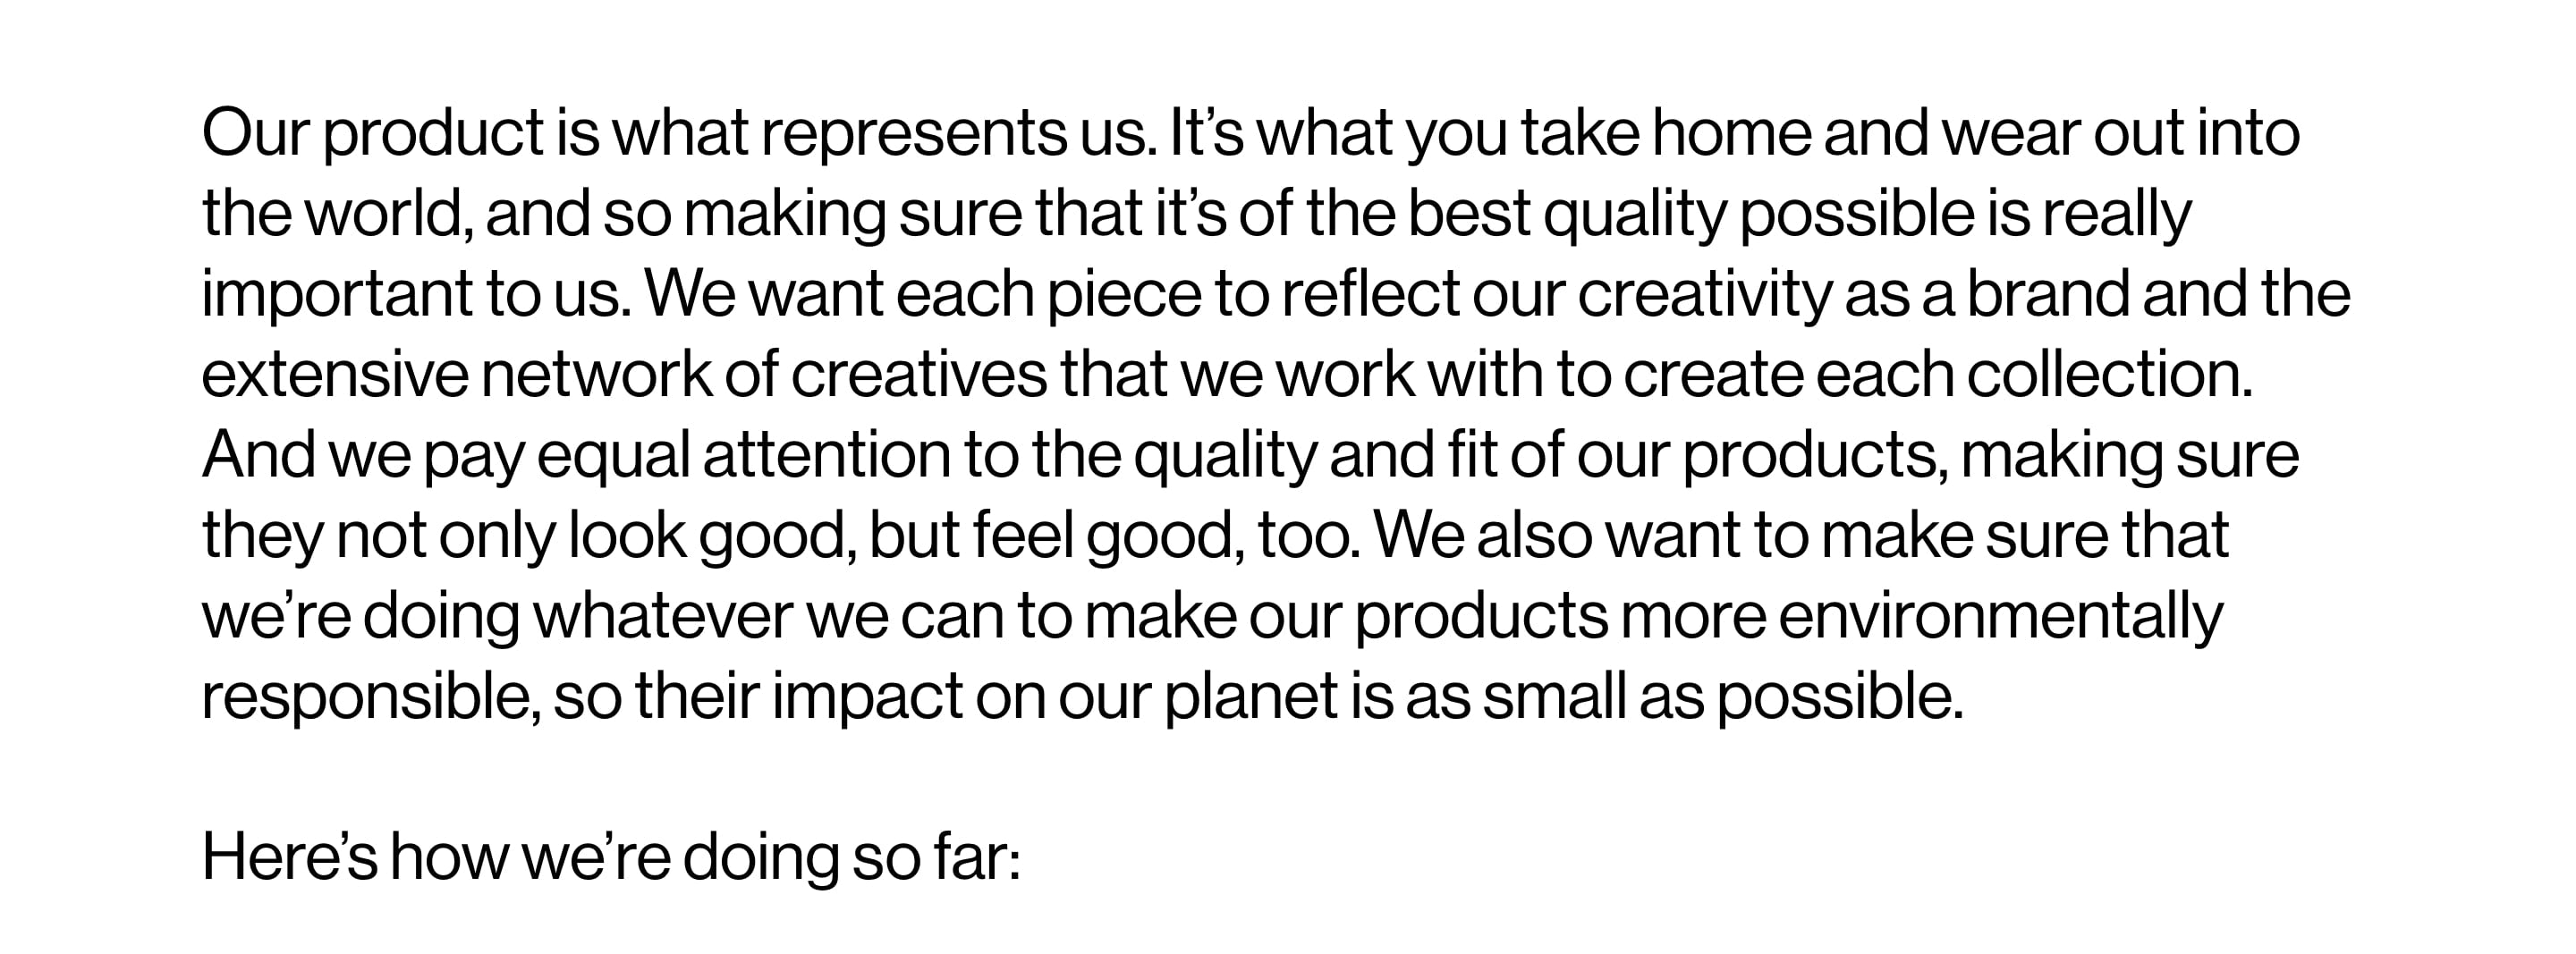 Our Brand Responsibility: Product